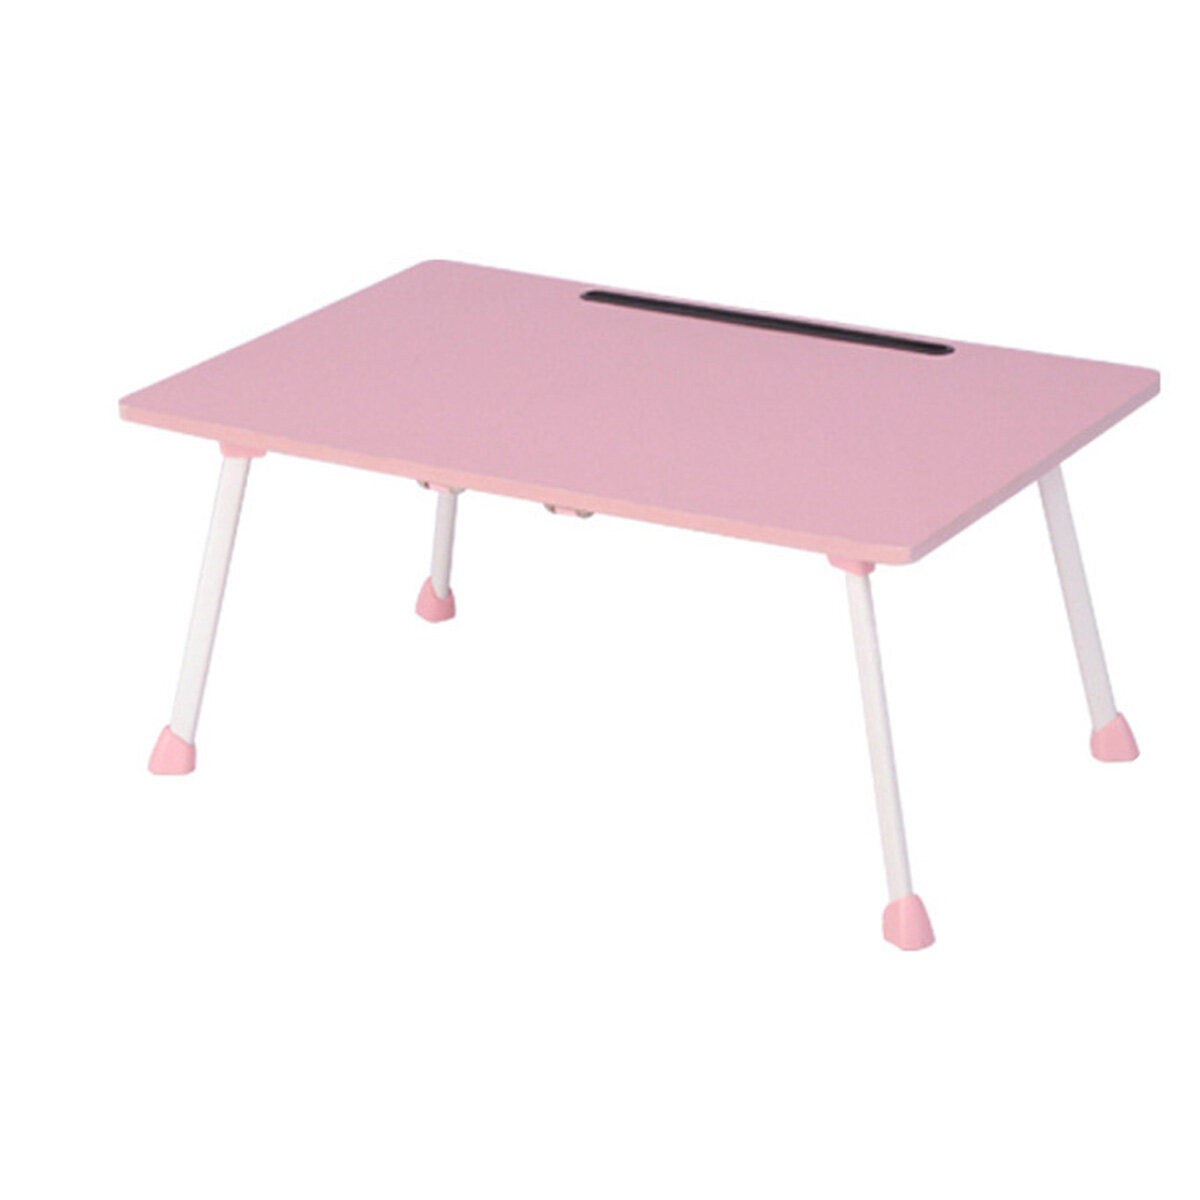 Laptop Desk Table Portable Folding Desk Notebook Table Lap Tray Bed with Slot for Children Student Home